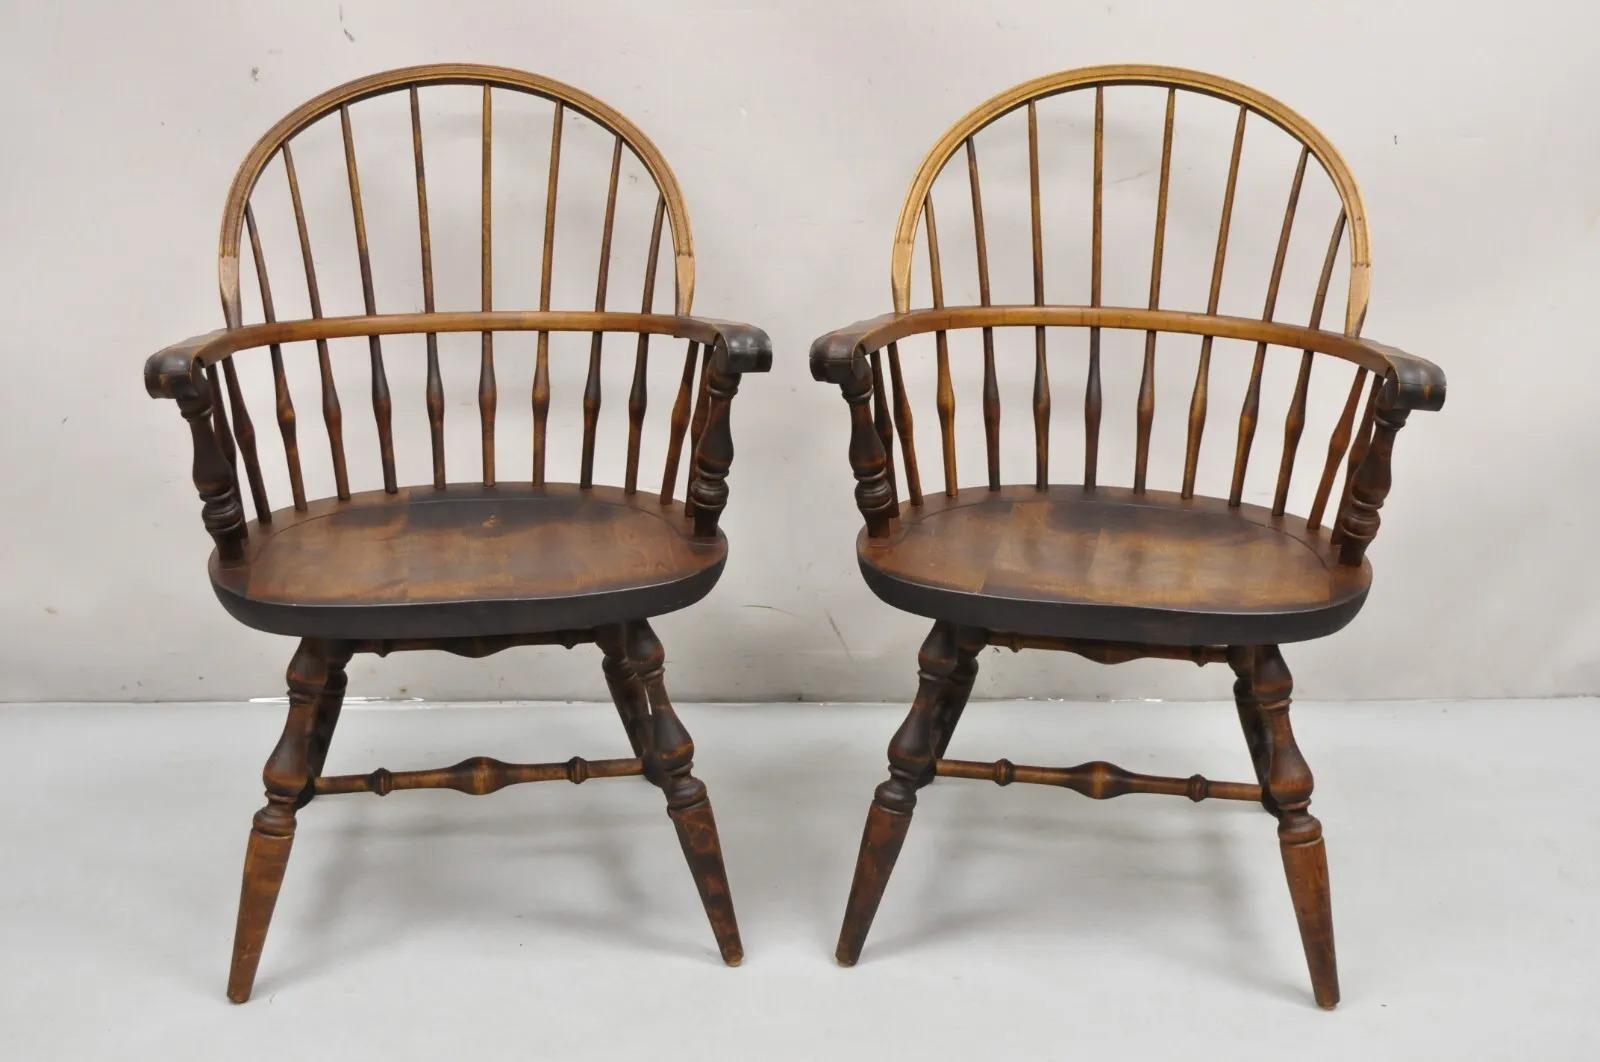 Nichols & Stone Rock Maple Wood Bowback Colonial Windsor Arm Chairs - a Pair. Circa Mid 20th Century. Measurements: 35